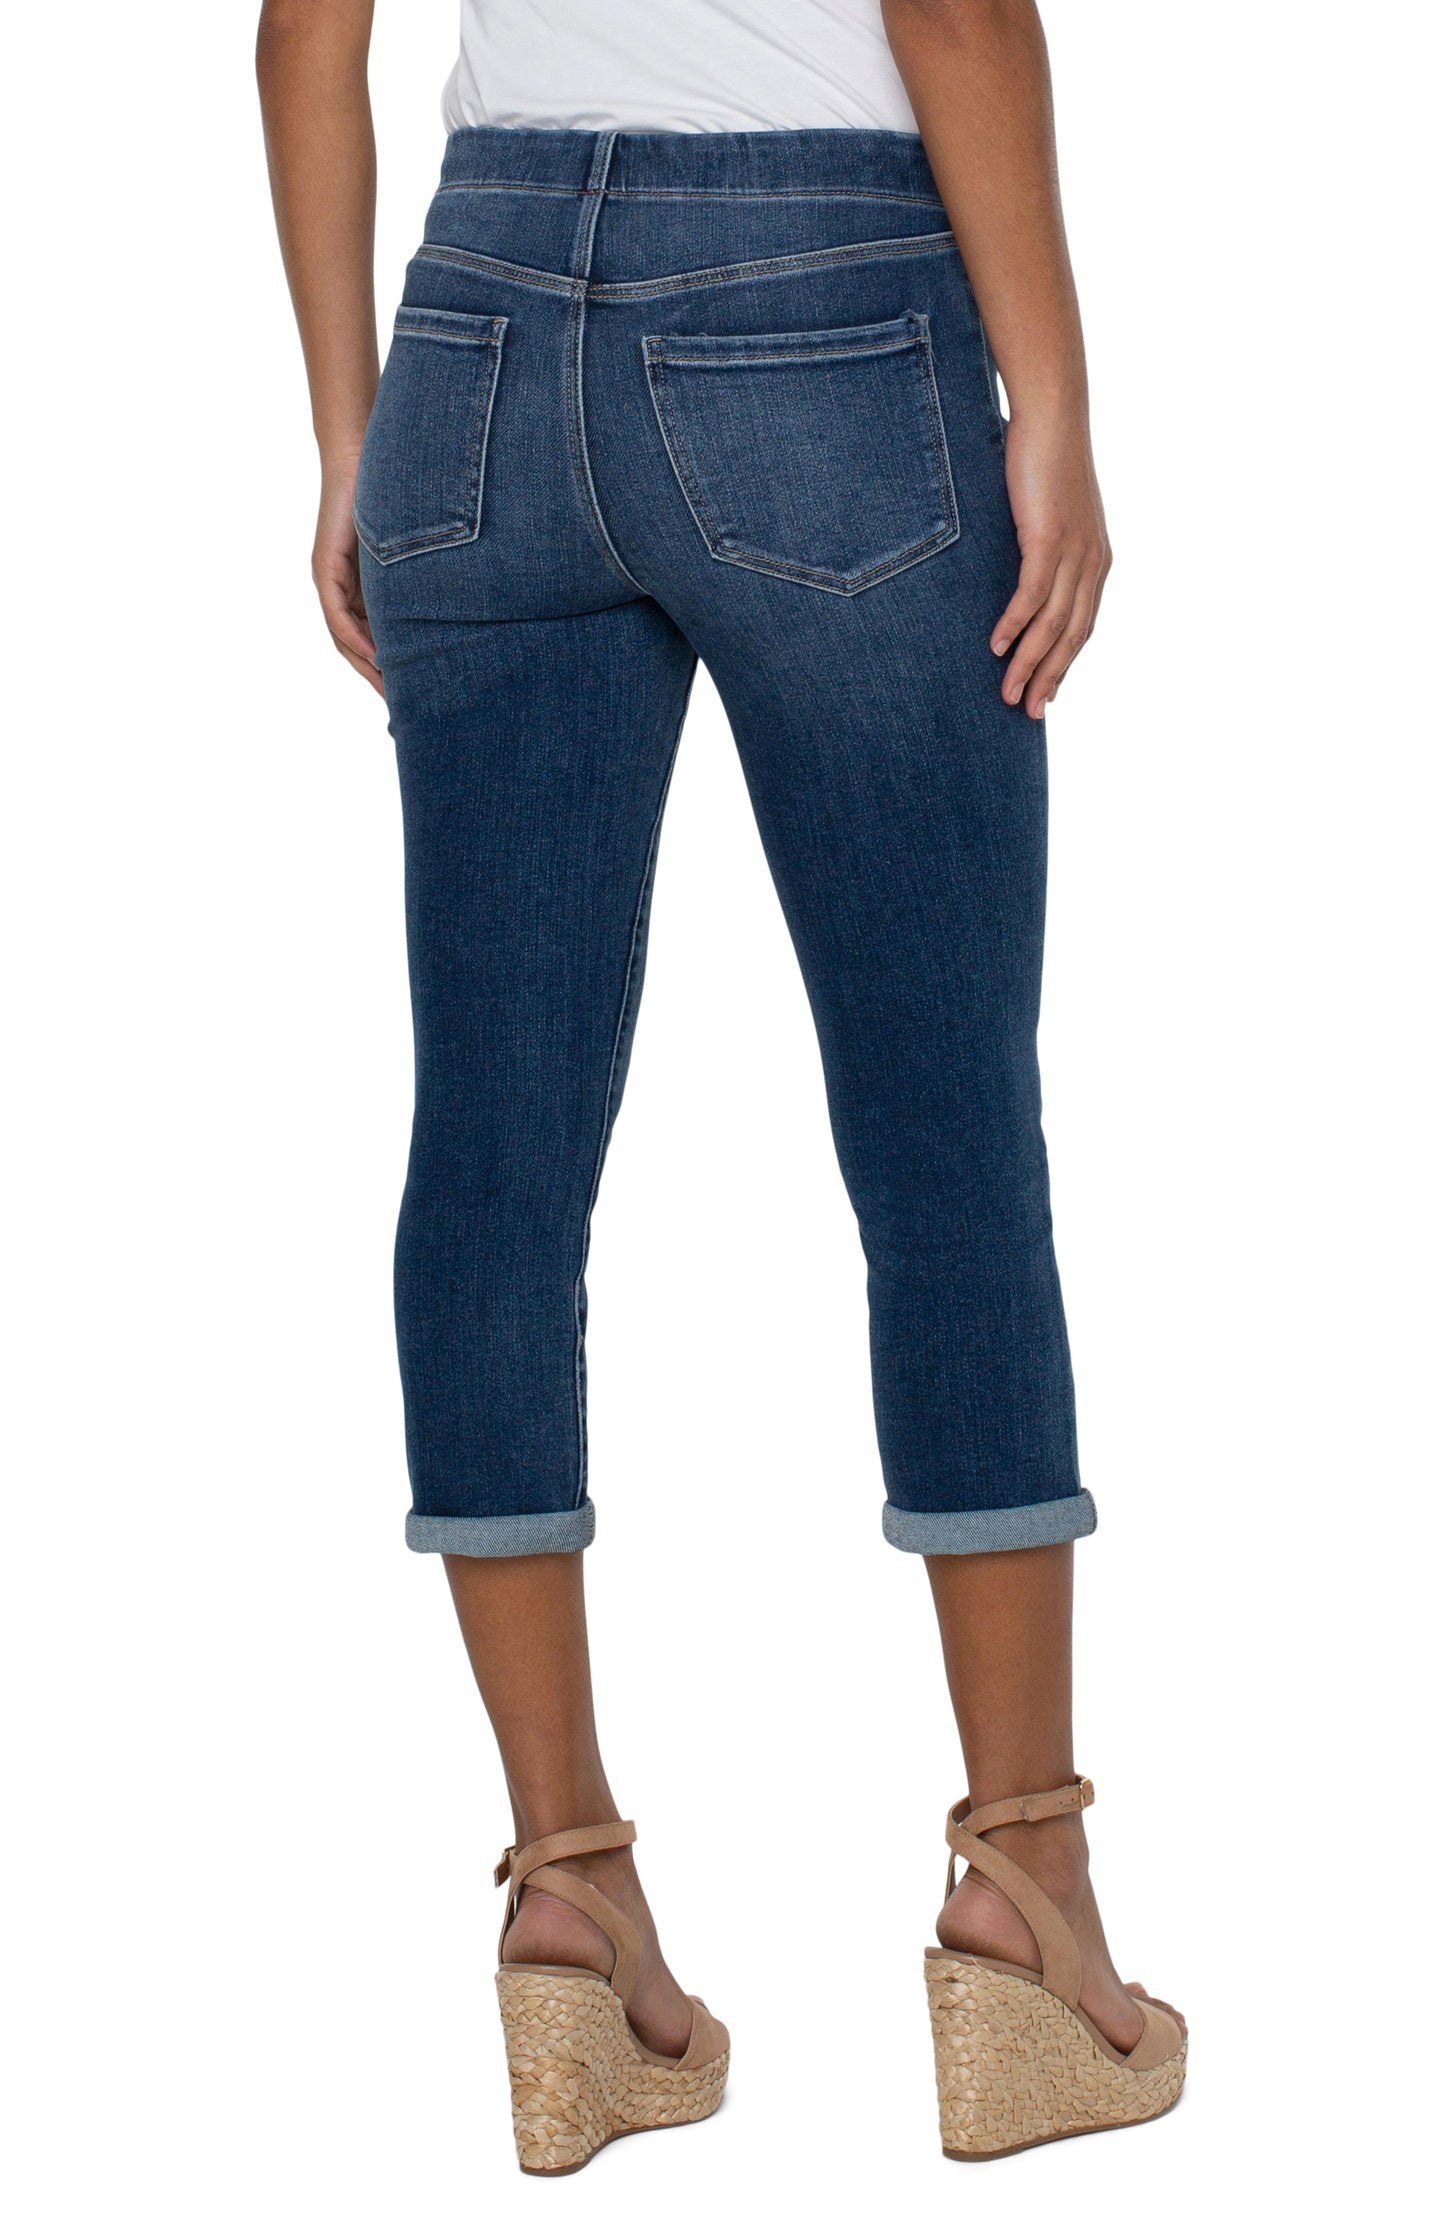 Liverpool Chloe Crop Skinny with Rolled Cuff Jeans (fowler)